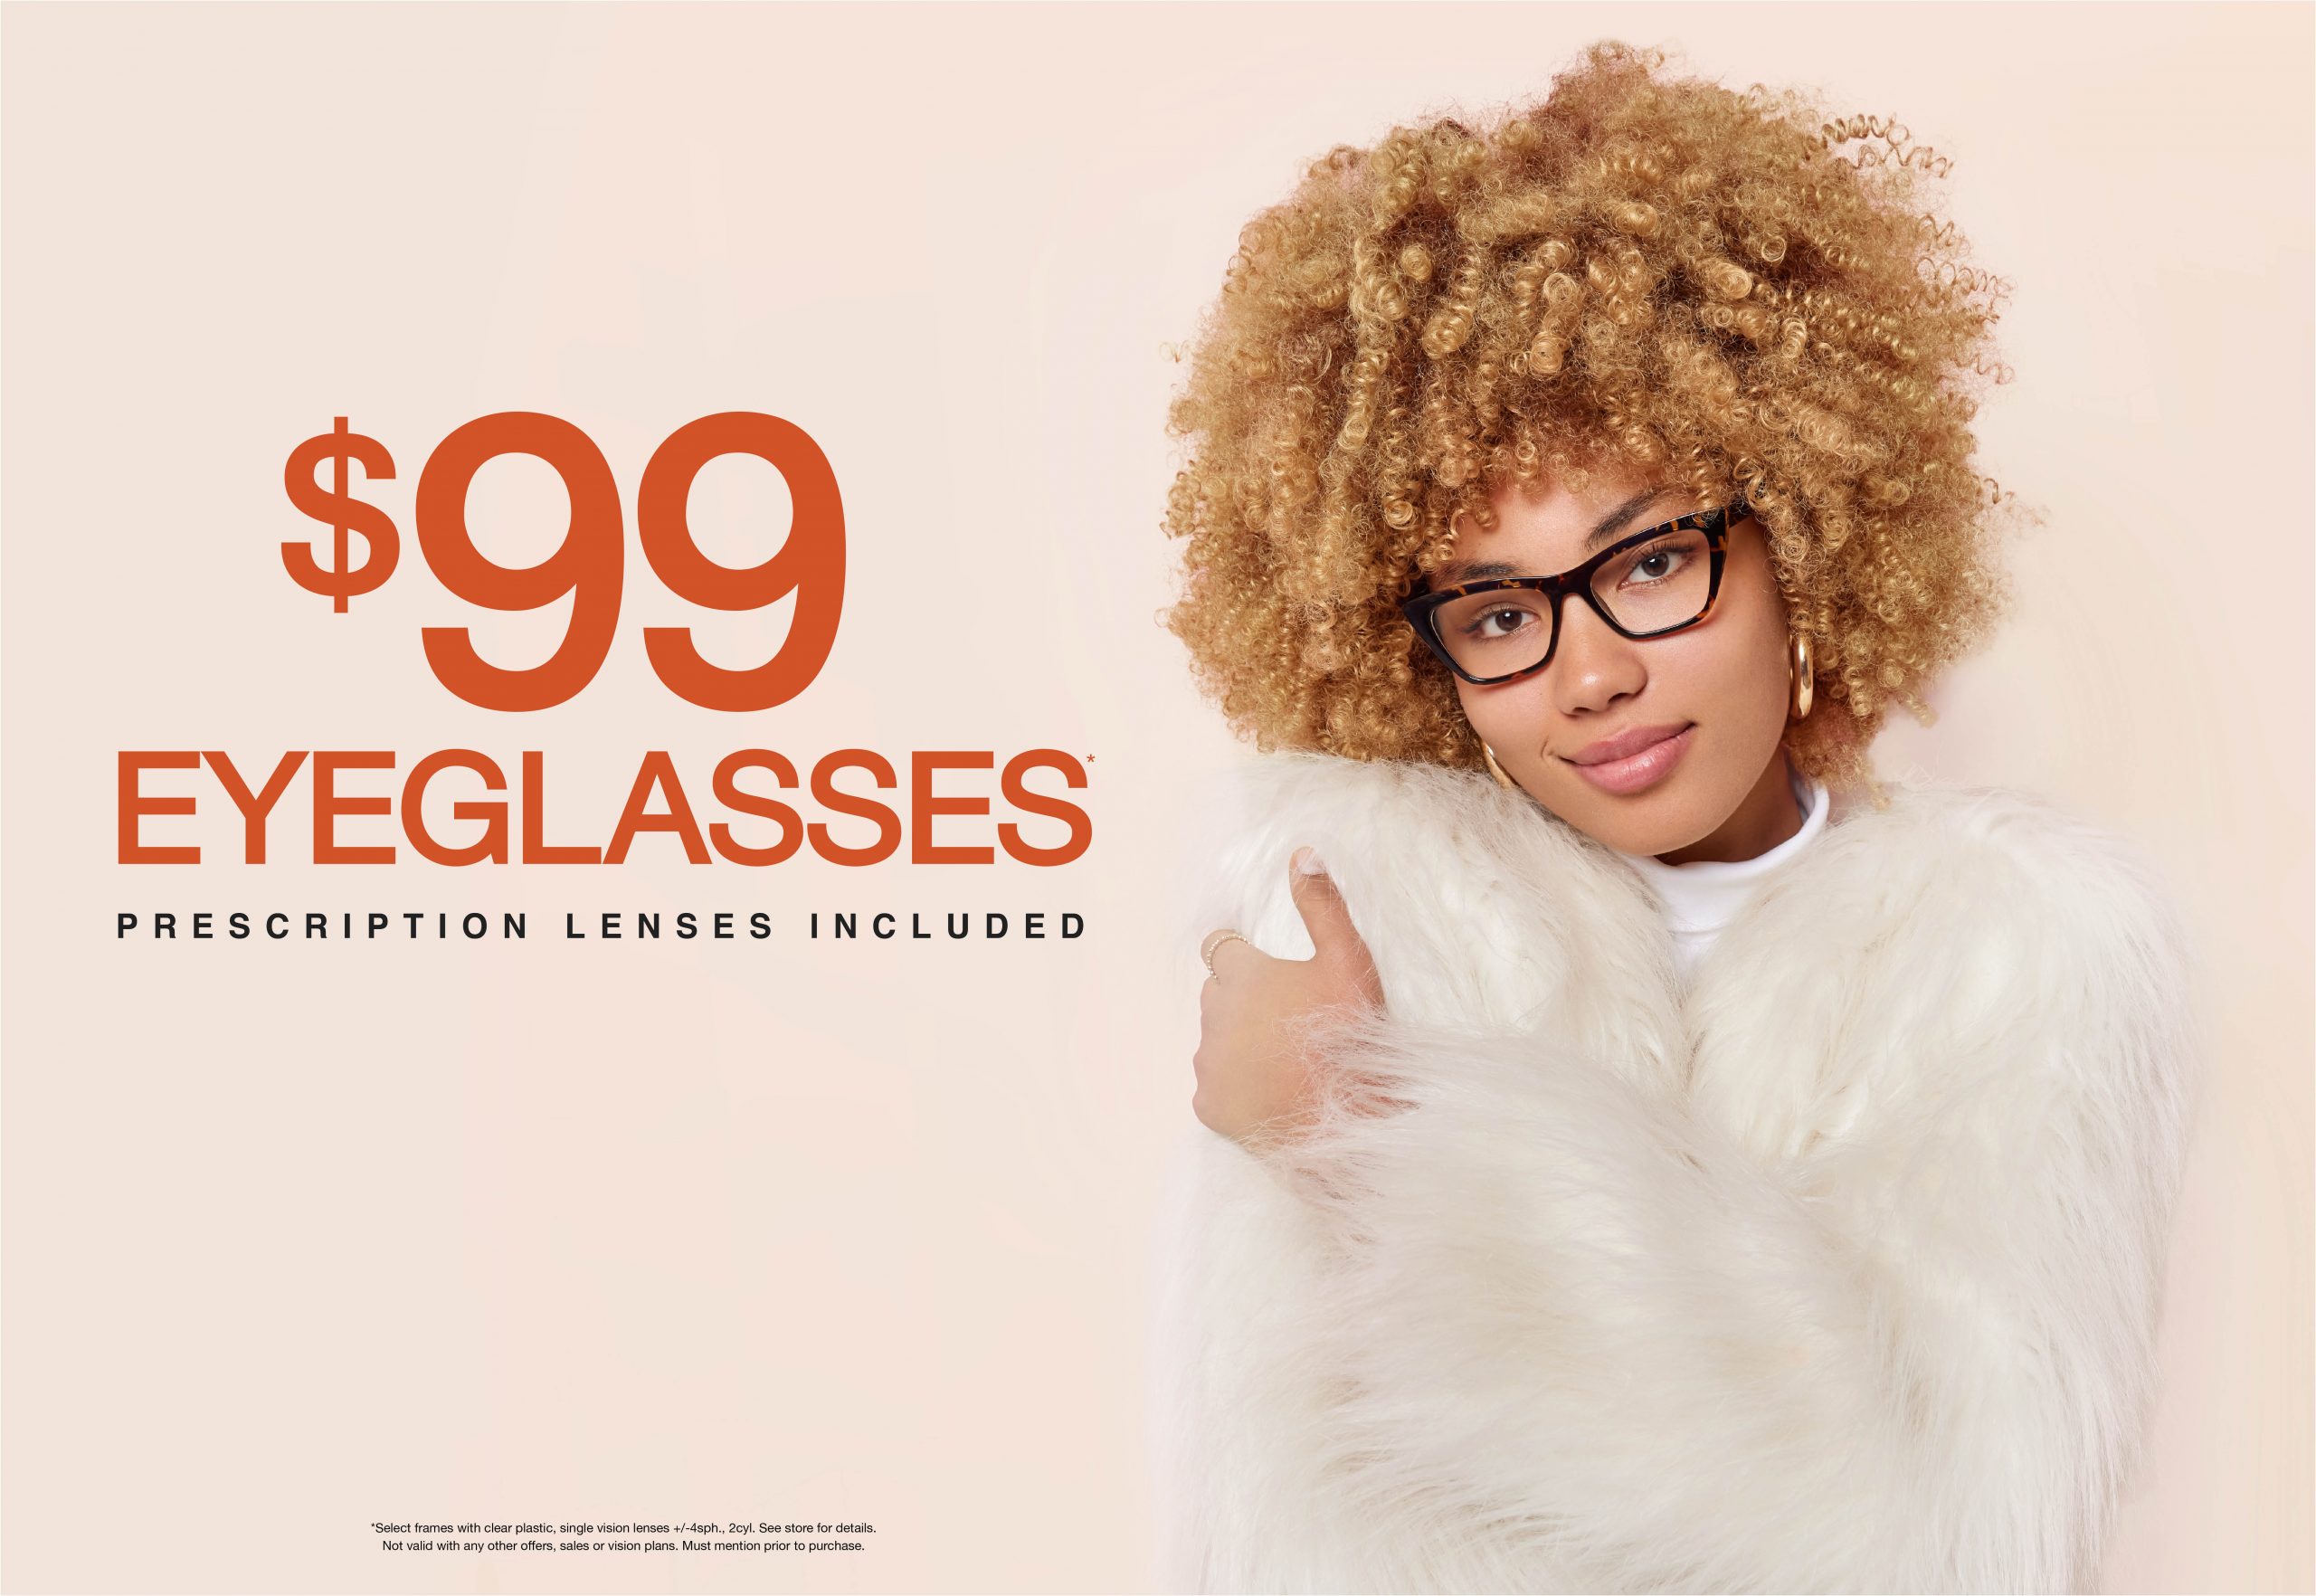 Text: $99 Eyeglasses* prescription lenses included *Select frames with clear plastic, single vision lenses +/-4sph., 2cyl. See store for details. Not valid with any other offers, sales or vision plans. Must mention prior to purchase. Photo: African American Female with curly hair wearing a white fur coat and eyeglasses. Against a light pink background.